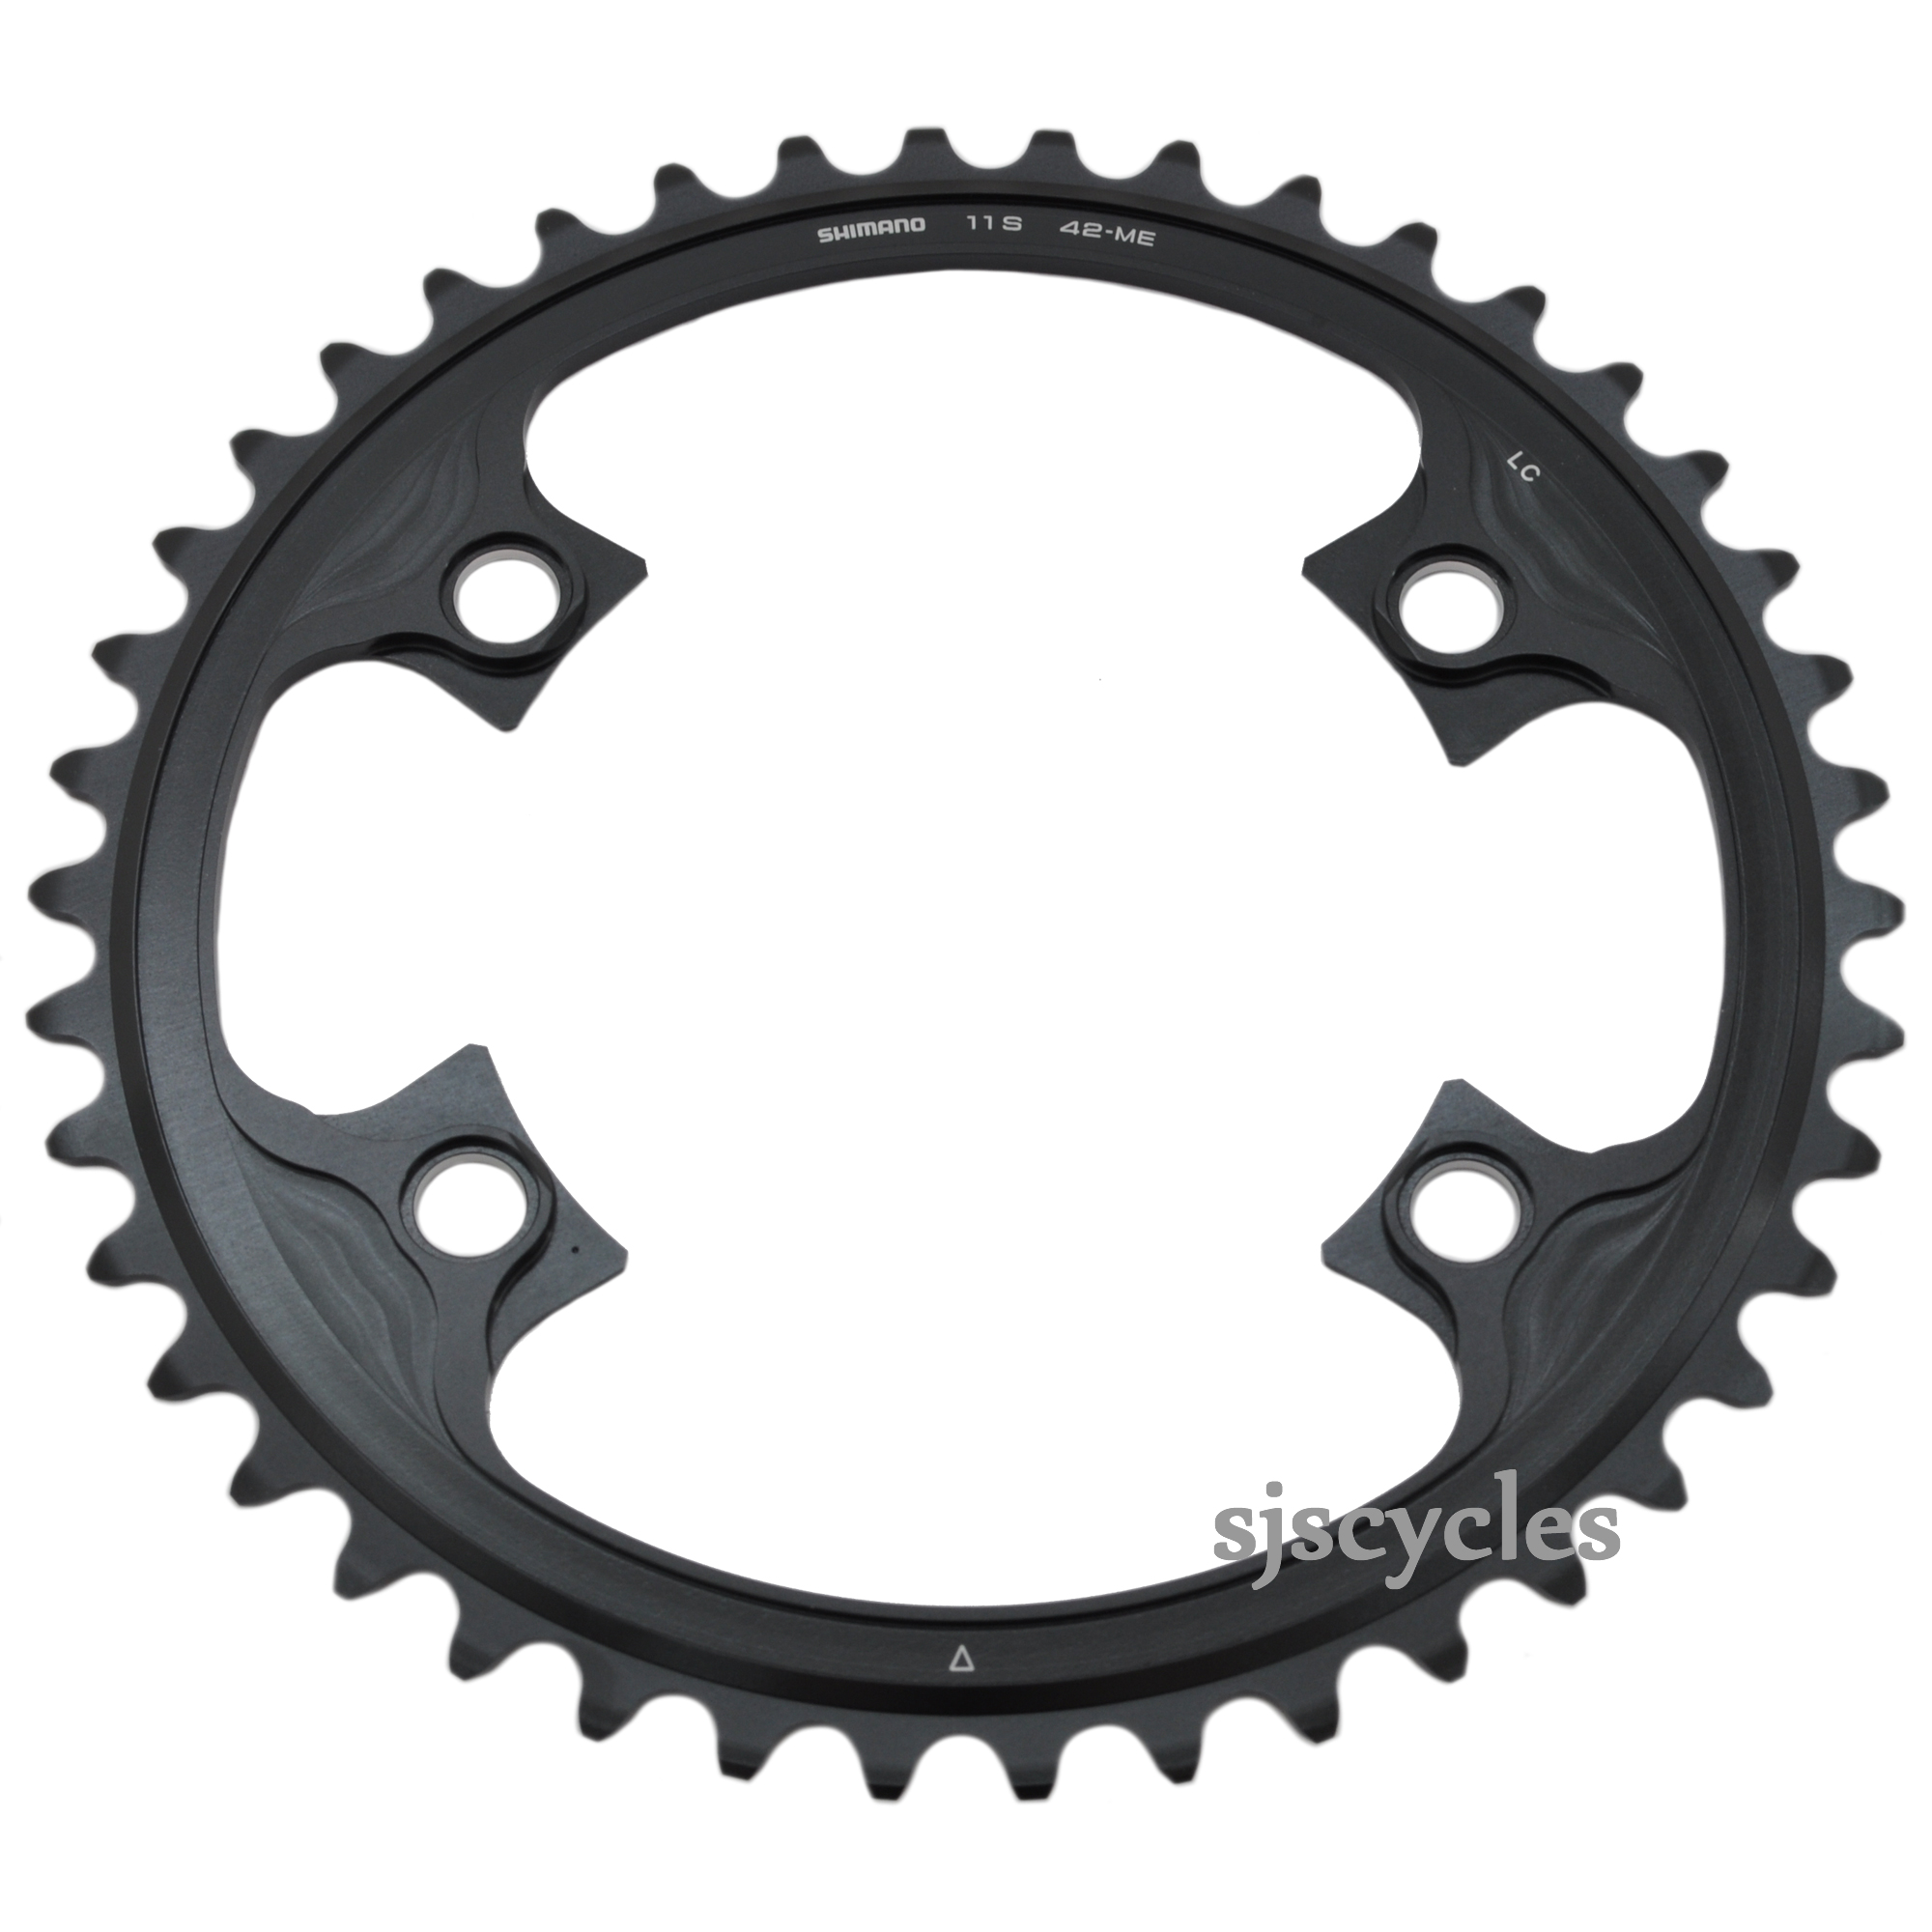 Shimano Dura-Ace 9000 42t 110mm 11-Speed Chainring for 54/42t and 55/42t